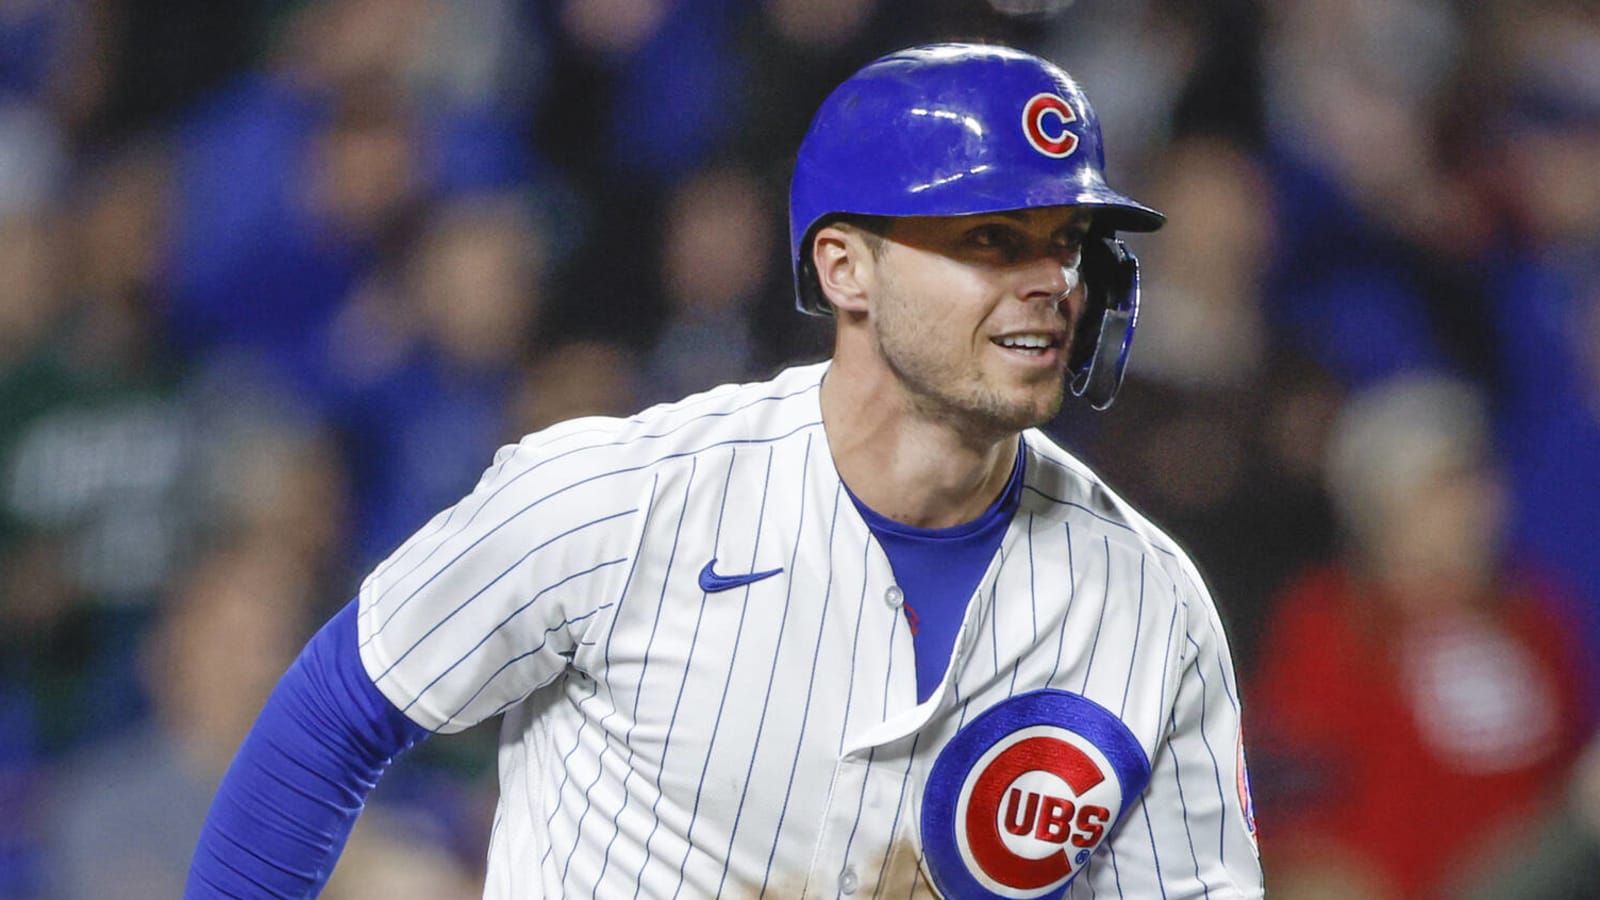 Homegrown talent may be Cubs' franchise player